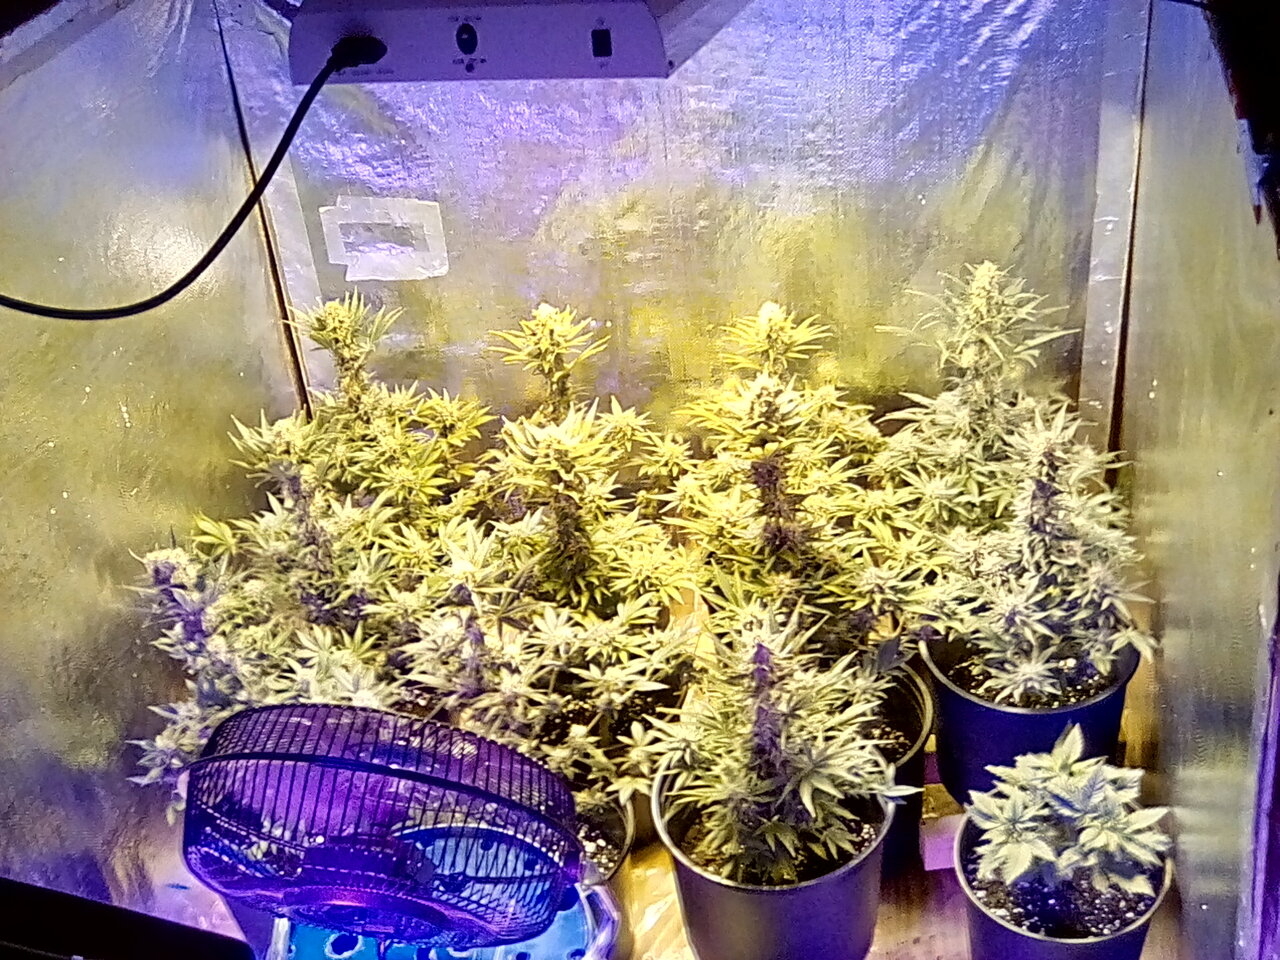 Day 49 of the flip.